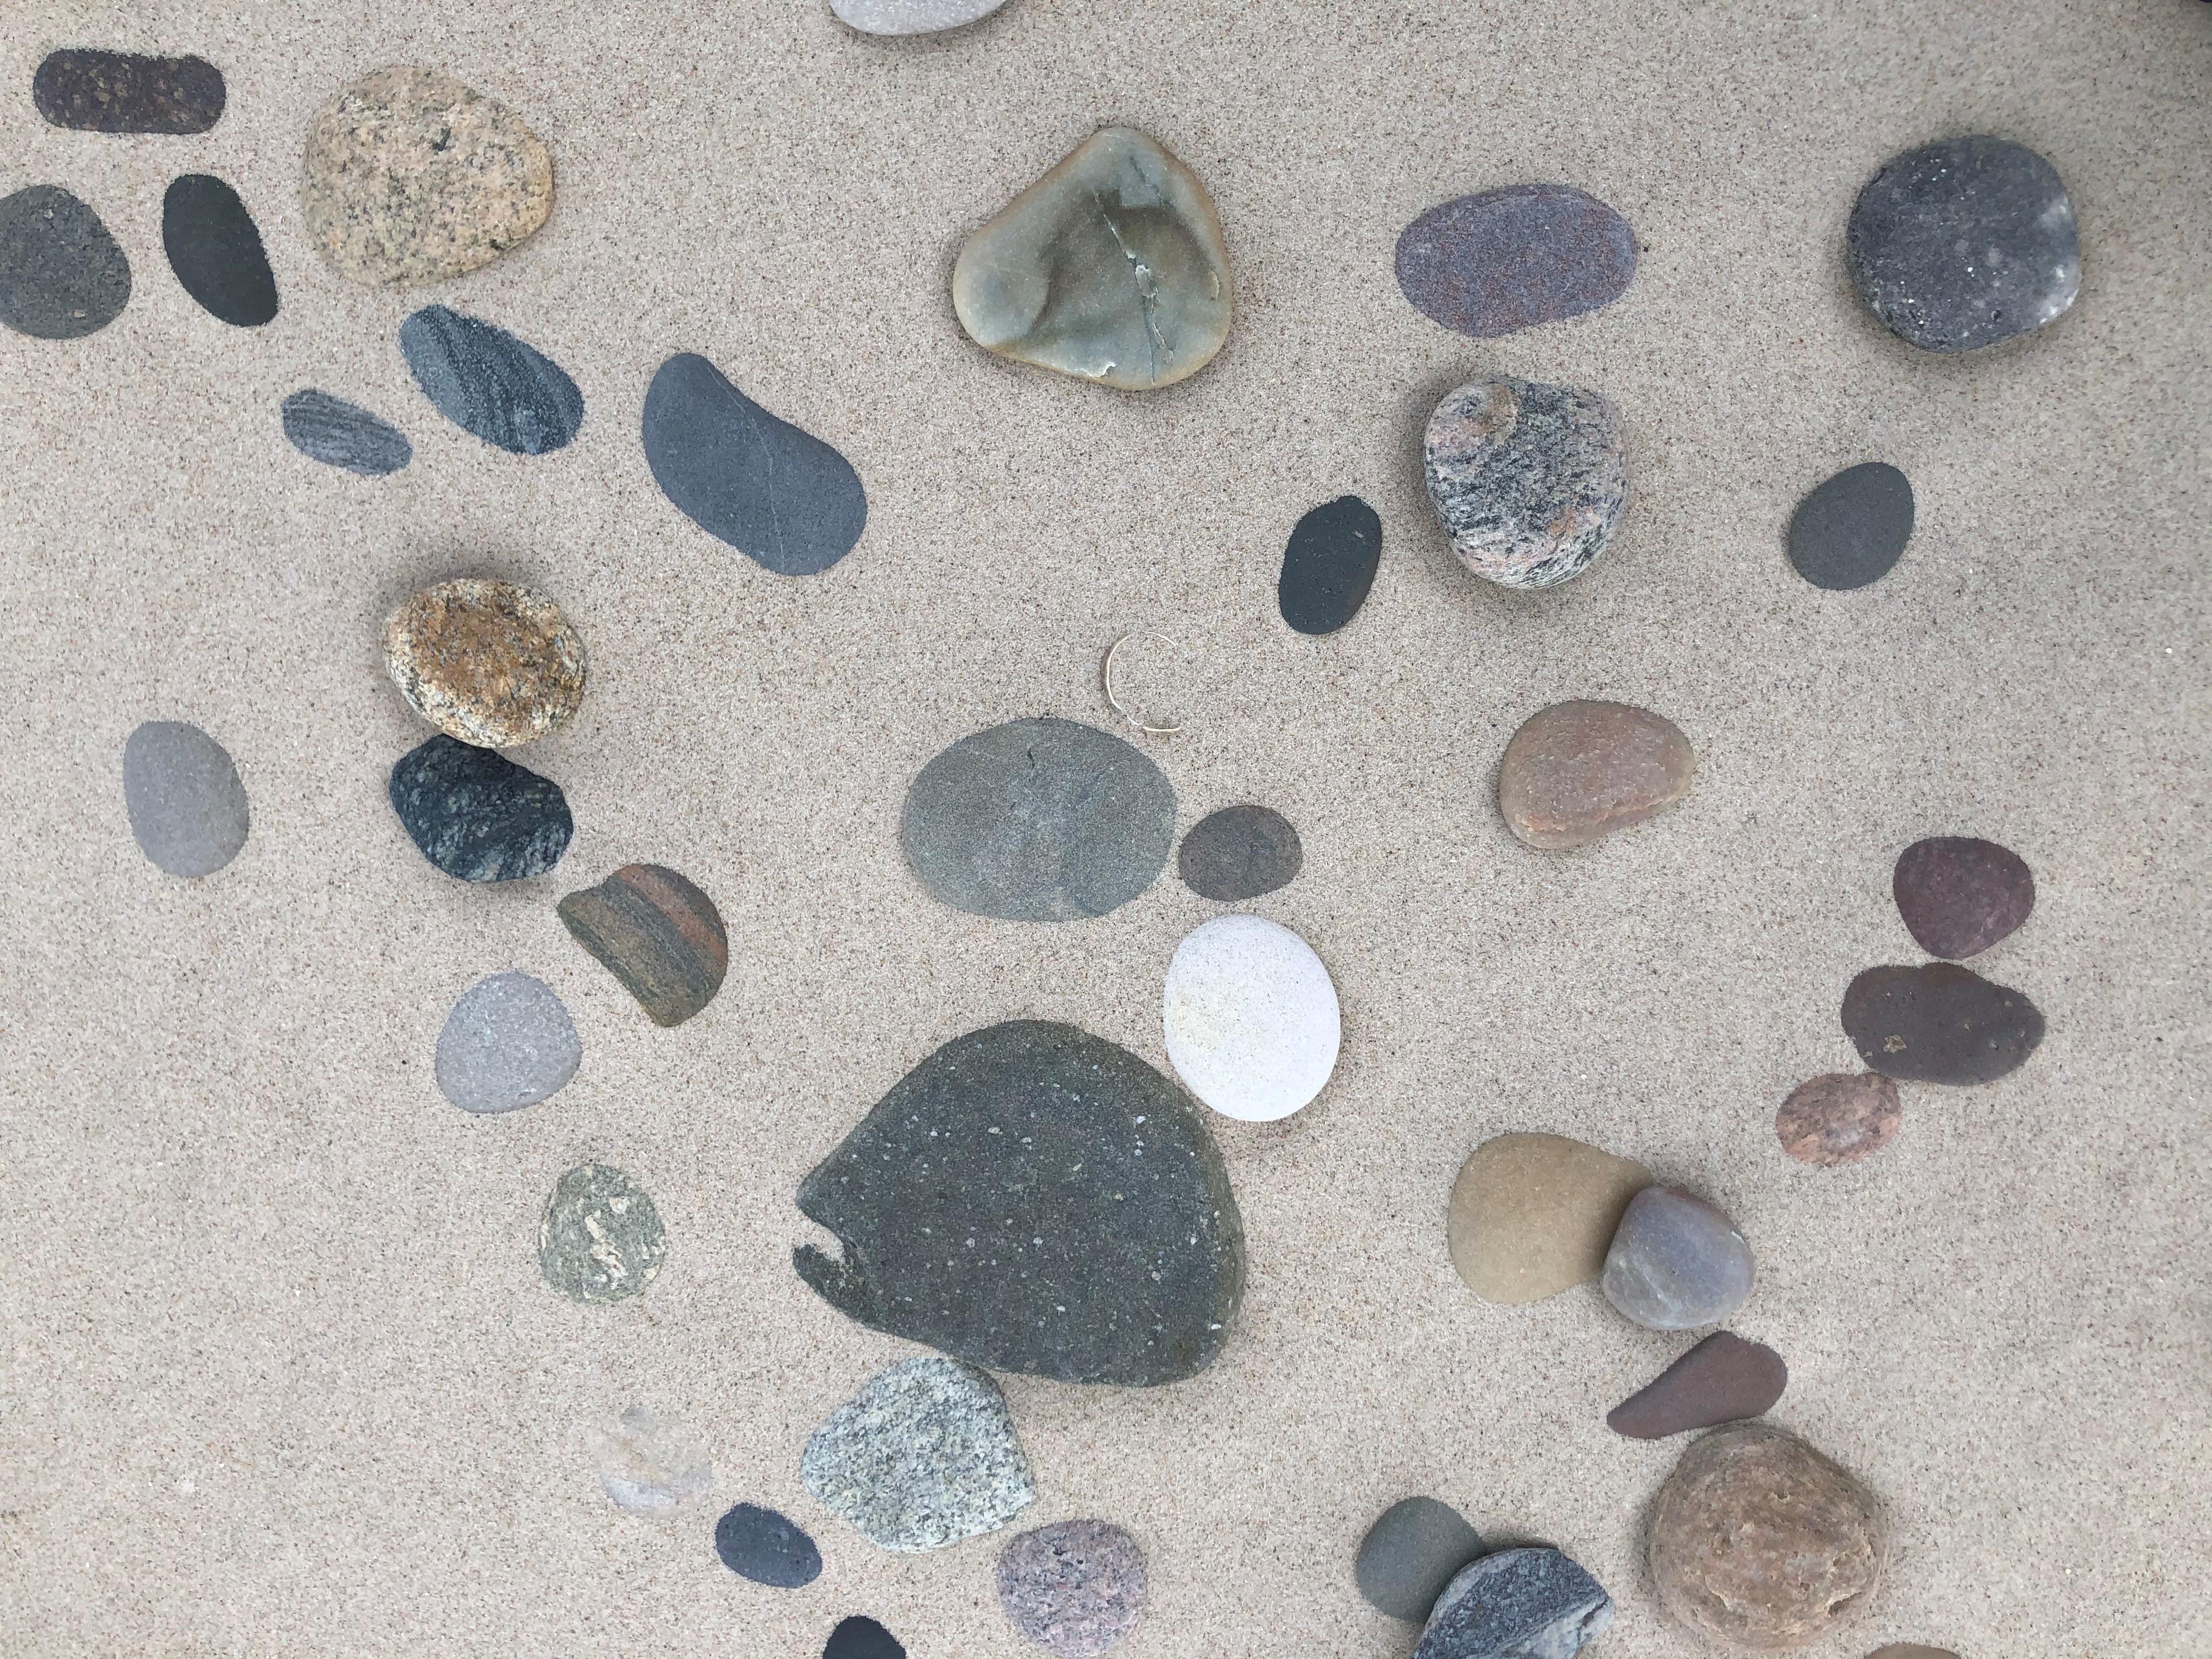 Photo of stones on a beach by Maj Thimm Carlsen